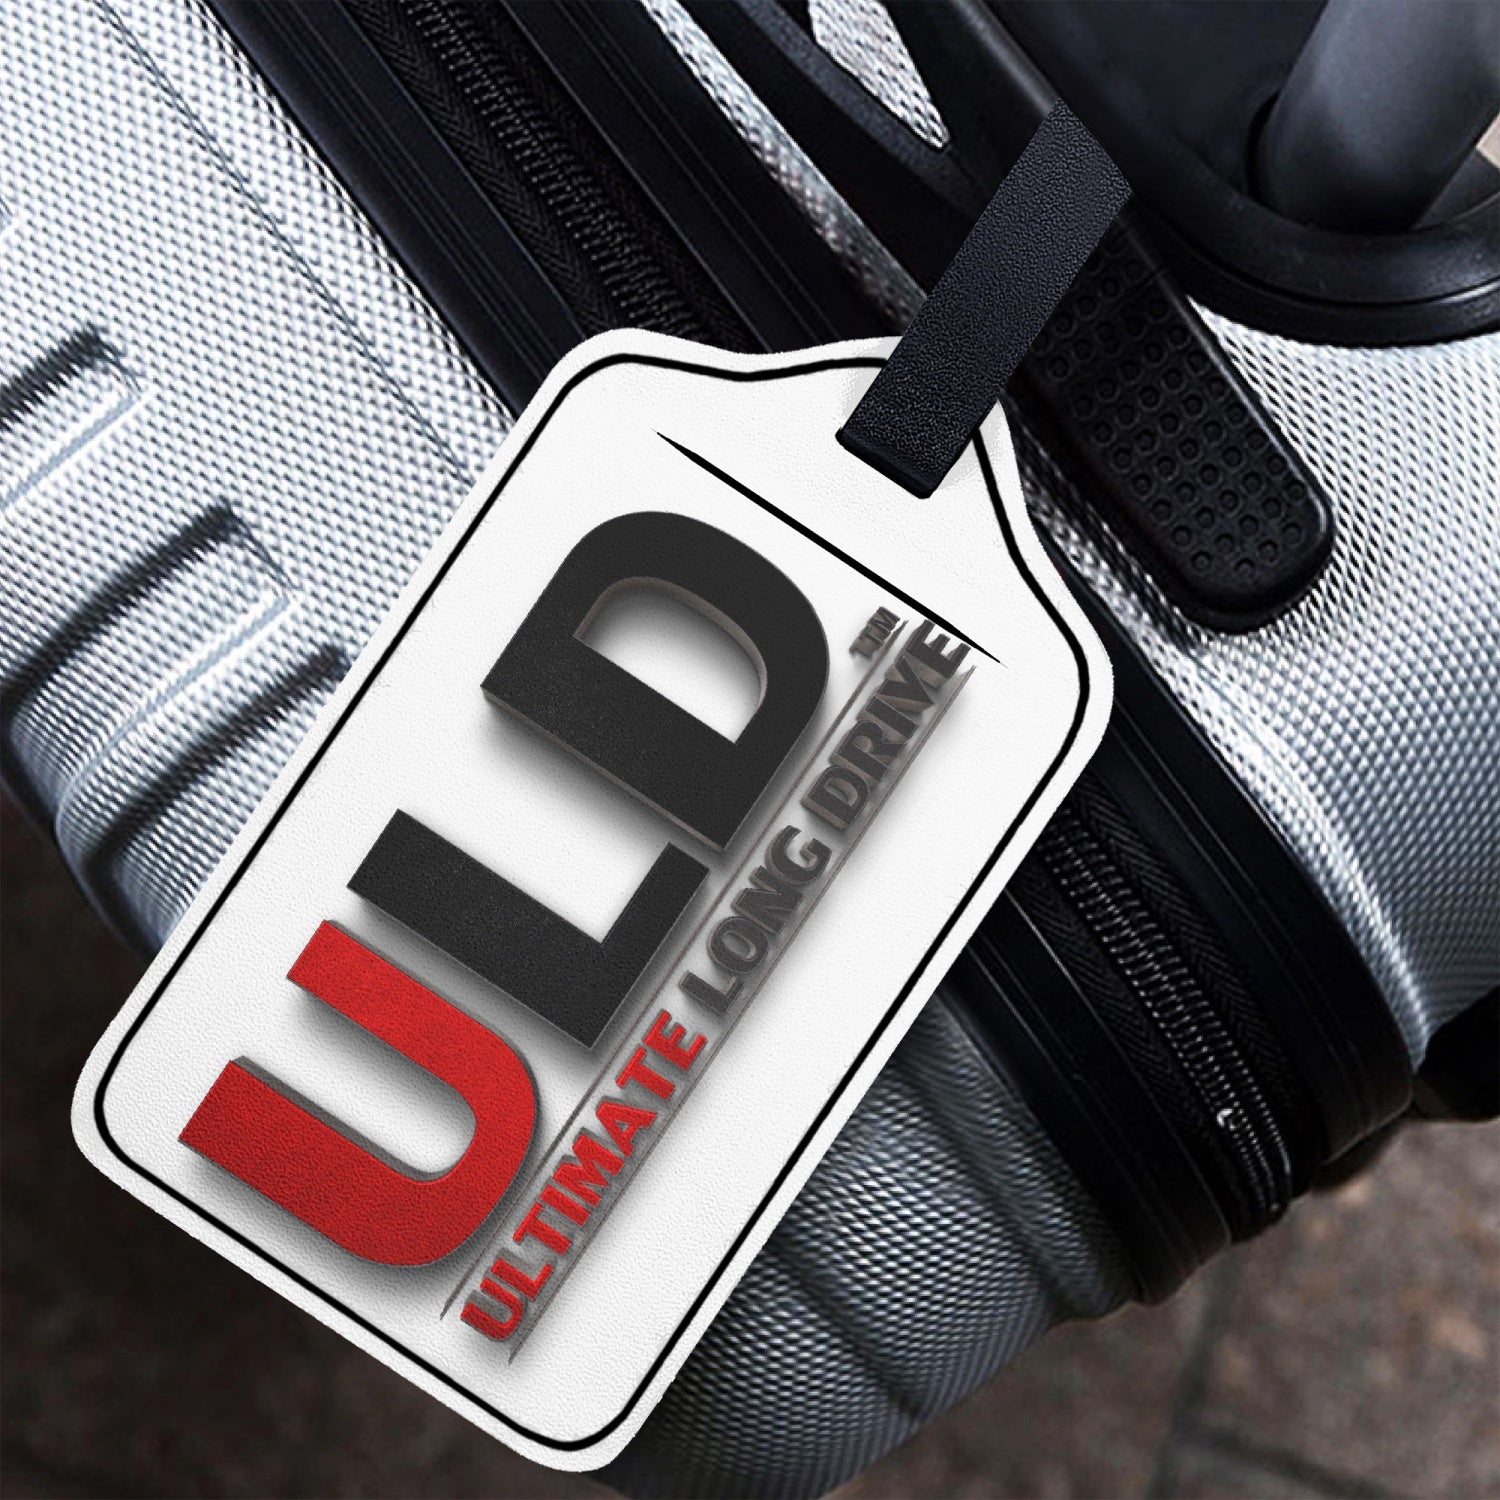 ULD Passport Cover And Luggage Tag